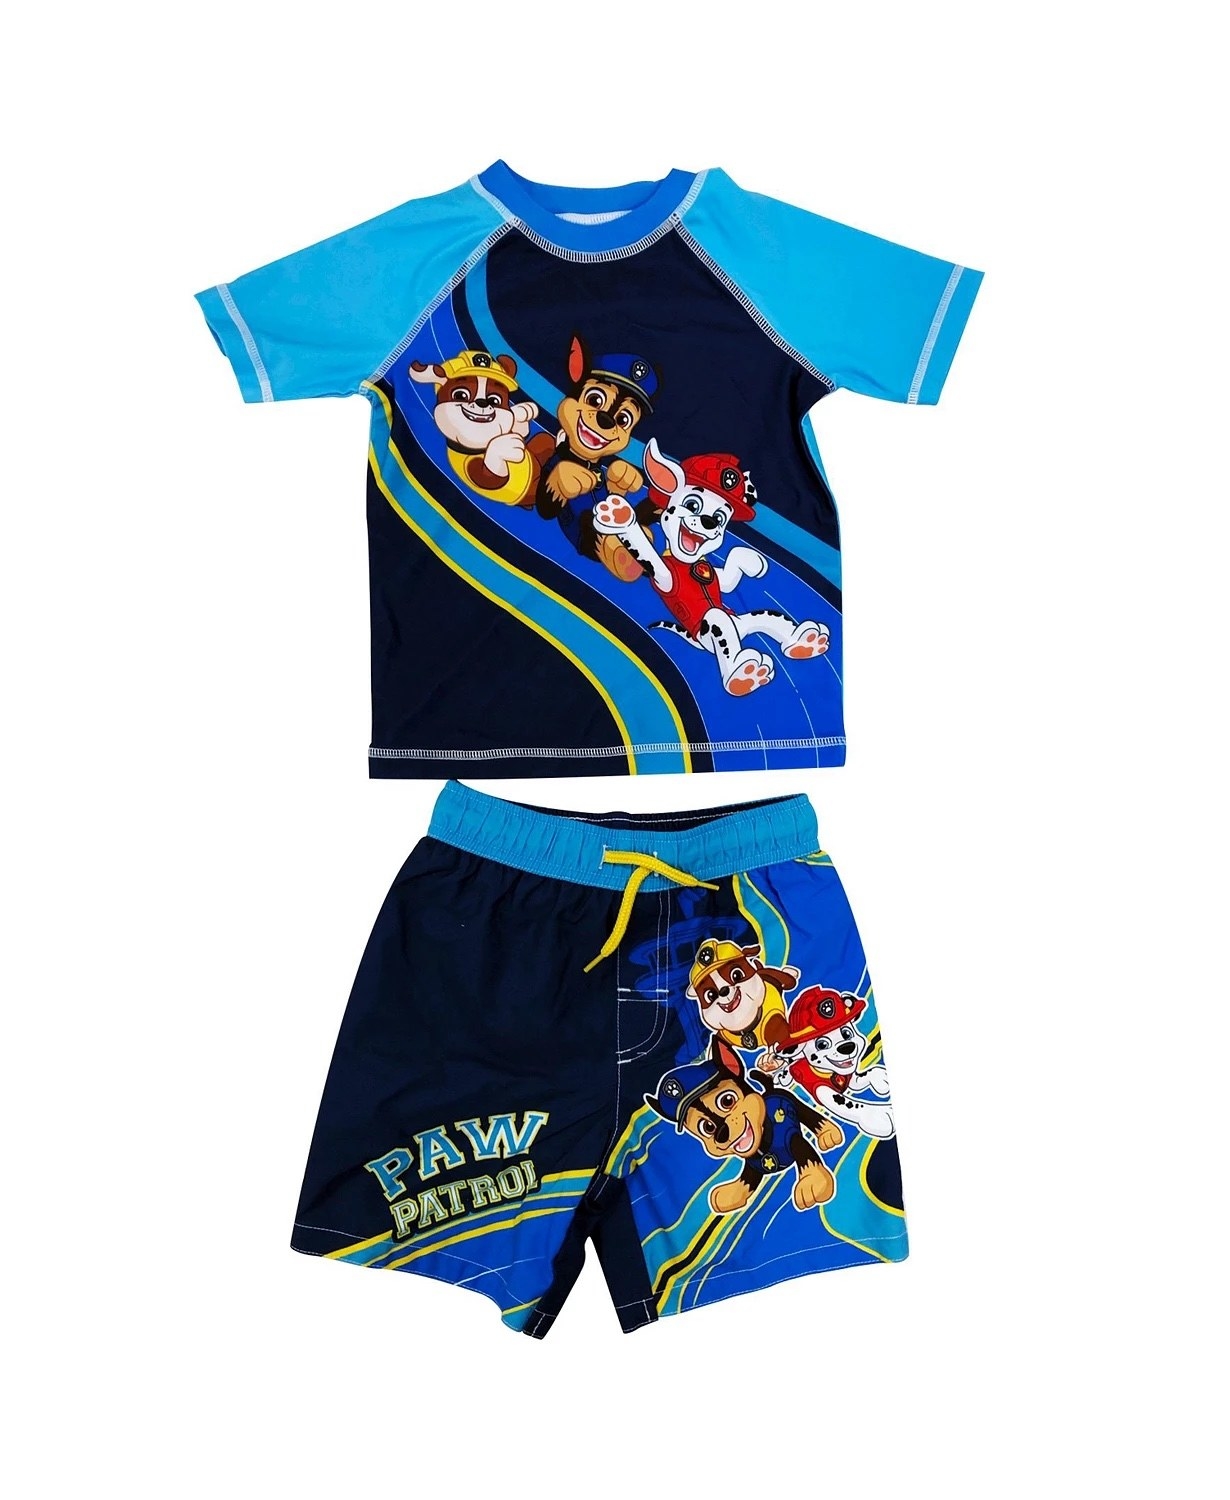 The paw patrol top and bottoms set